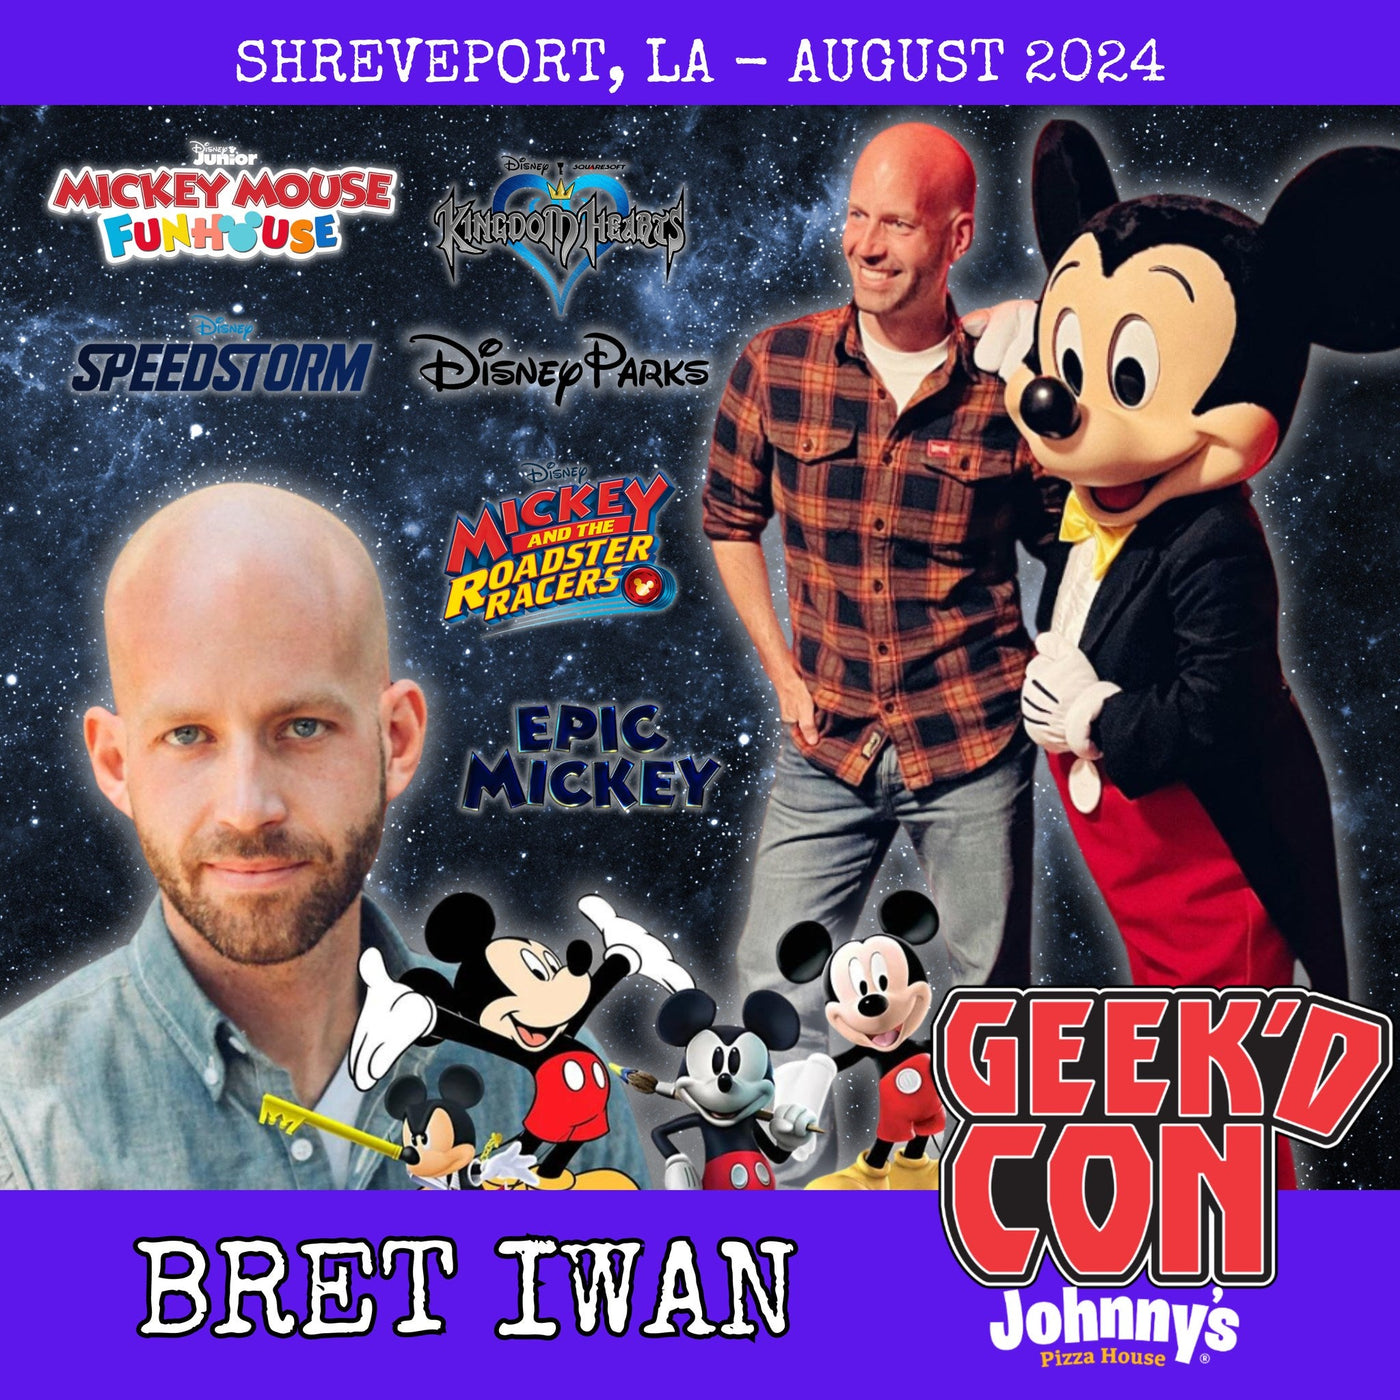 Bret Iwan Official Autograph Mail-In Service - Geek'd Con 2024